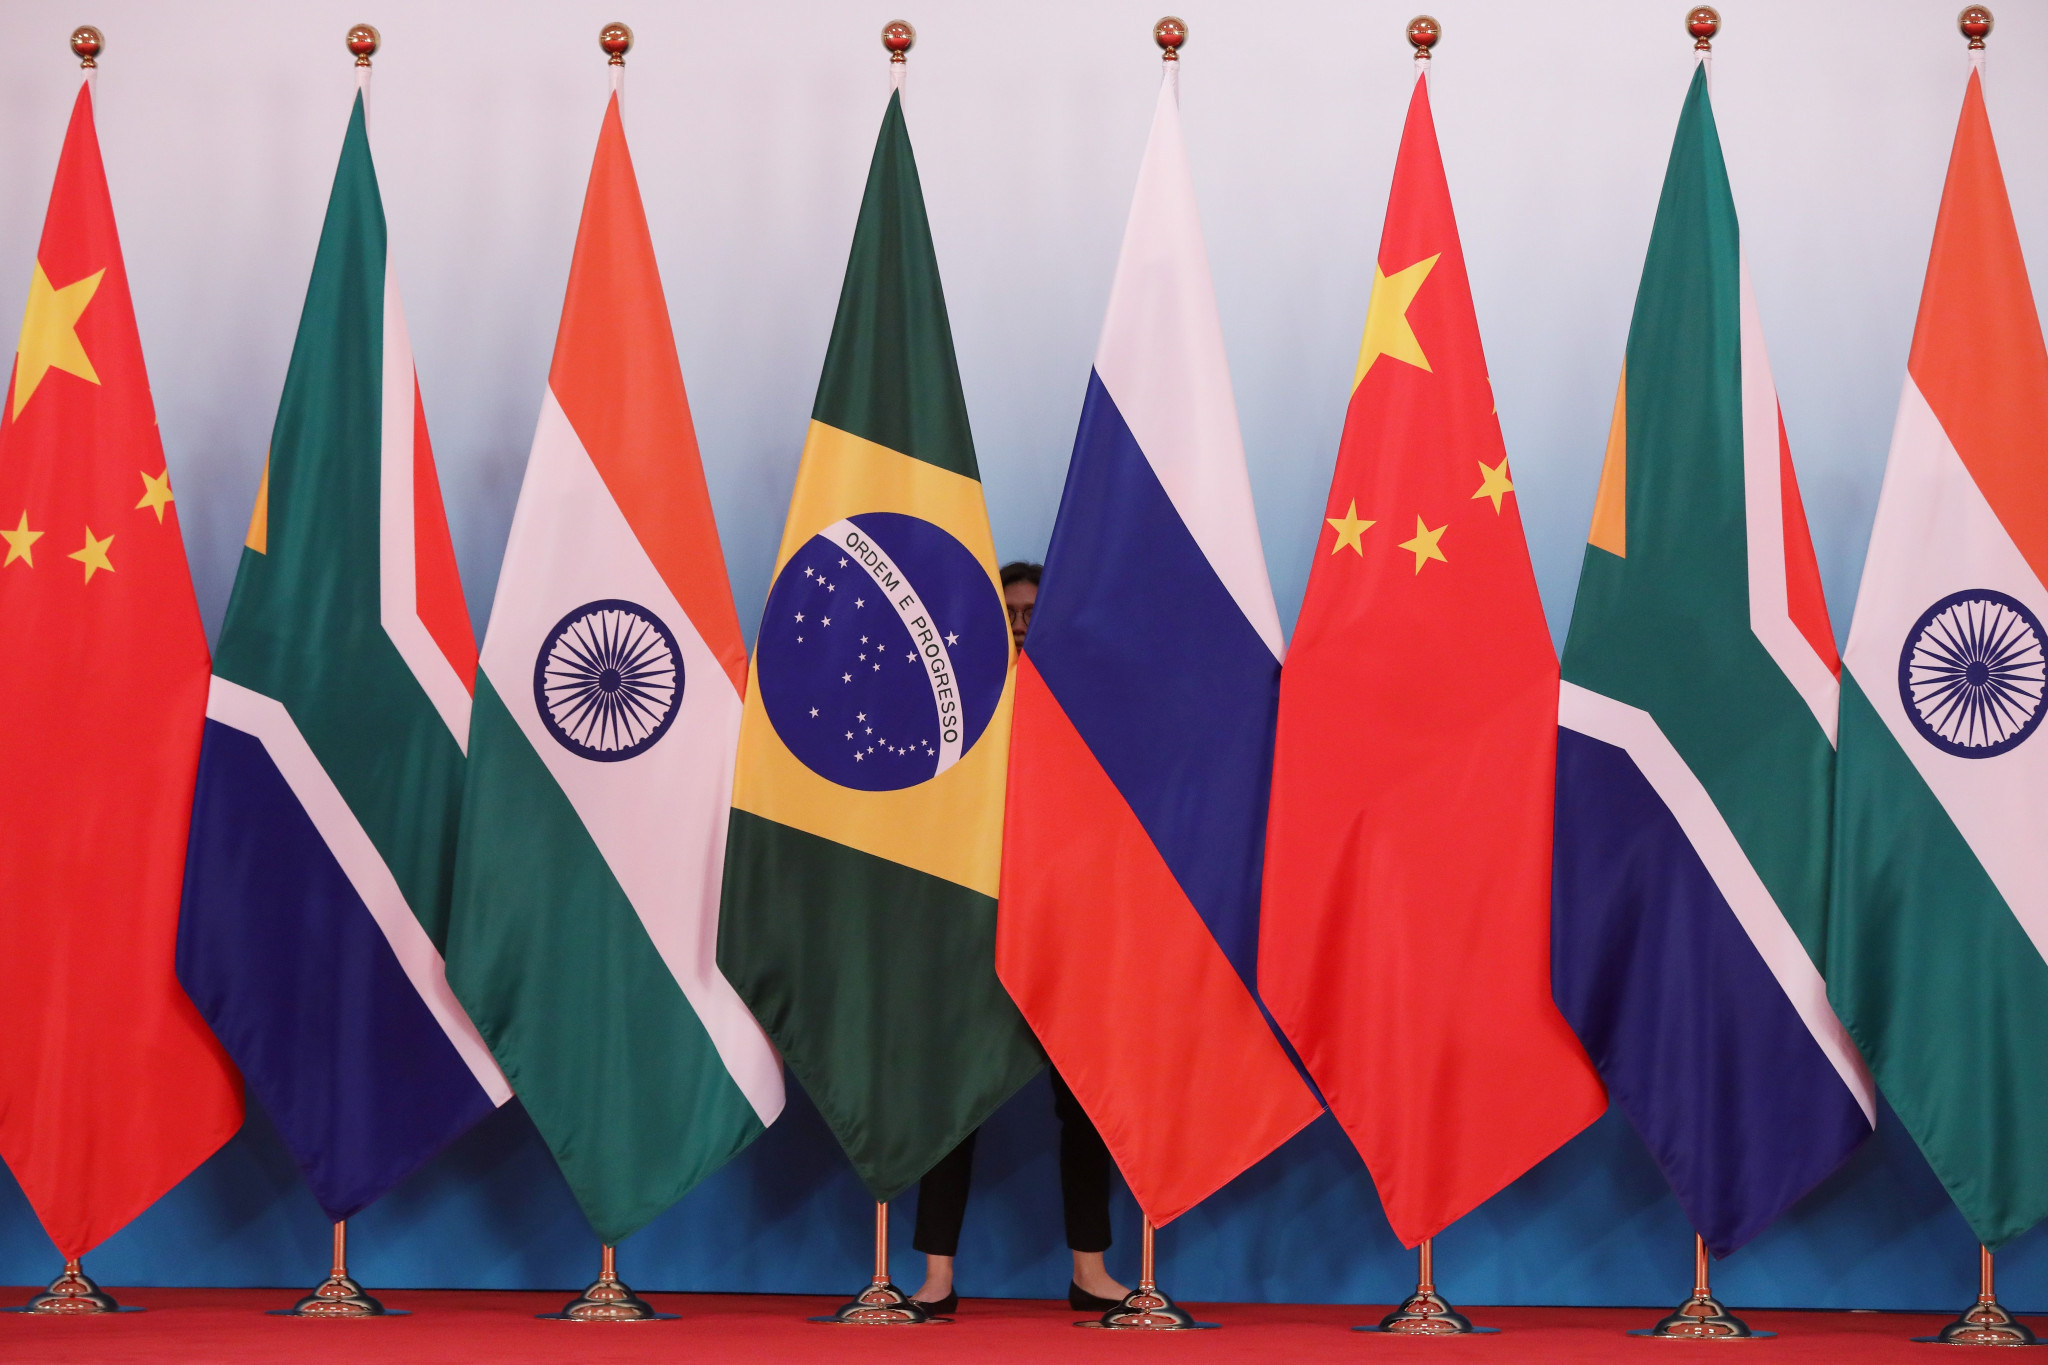 BRICS members Brazil, Russia, India, China and South Africa are expected to compete in the multi-sport event in Kazan in June next year ©Getty Images